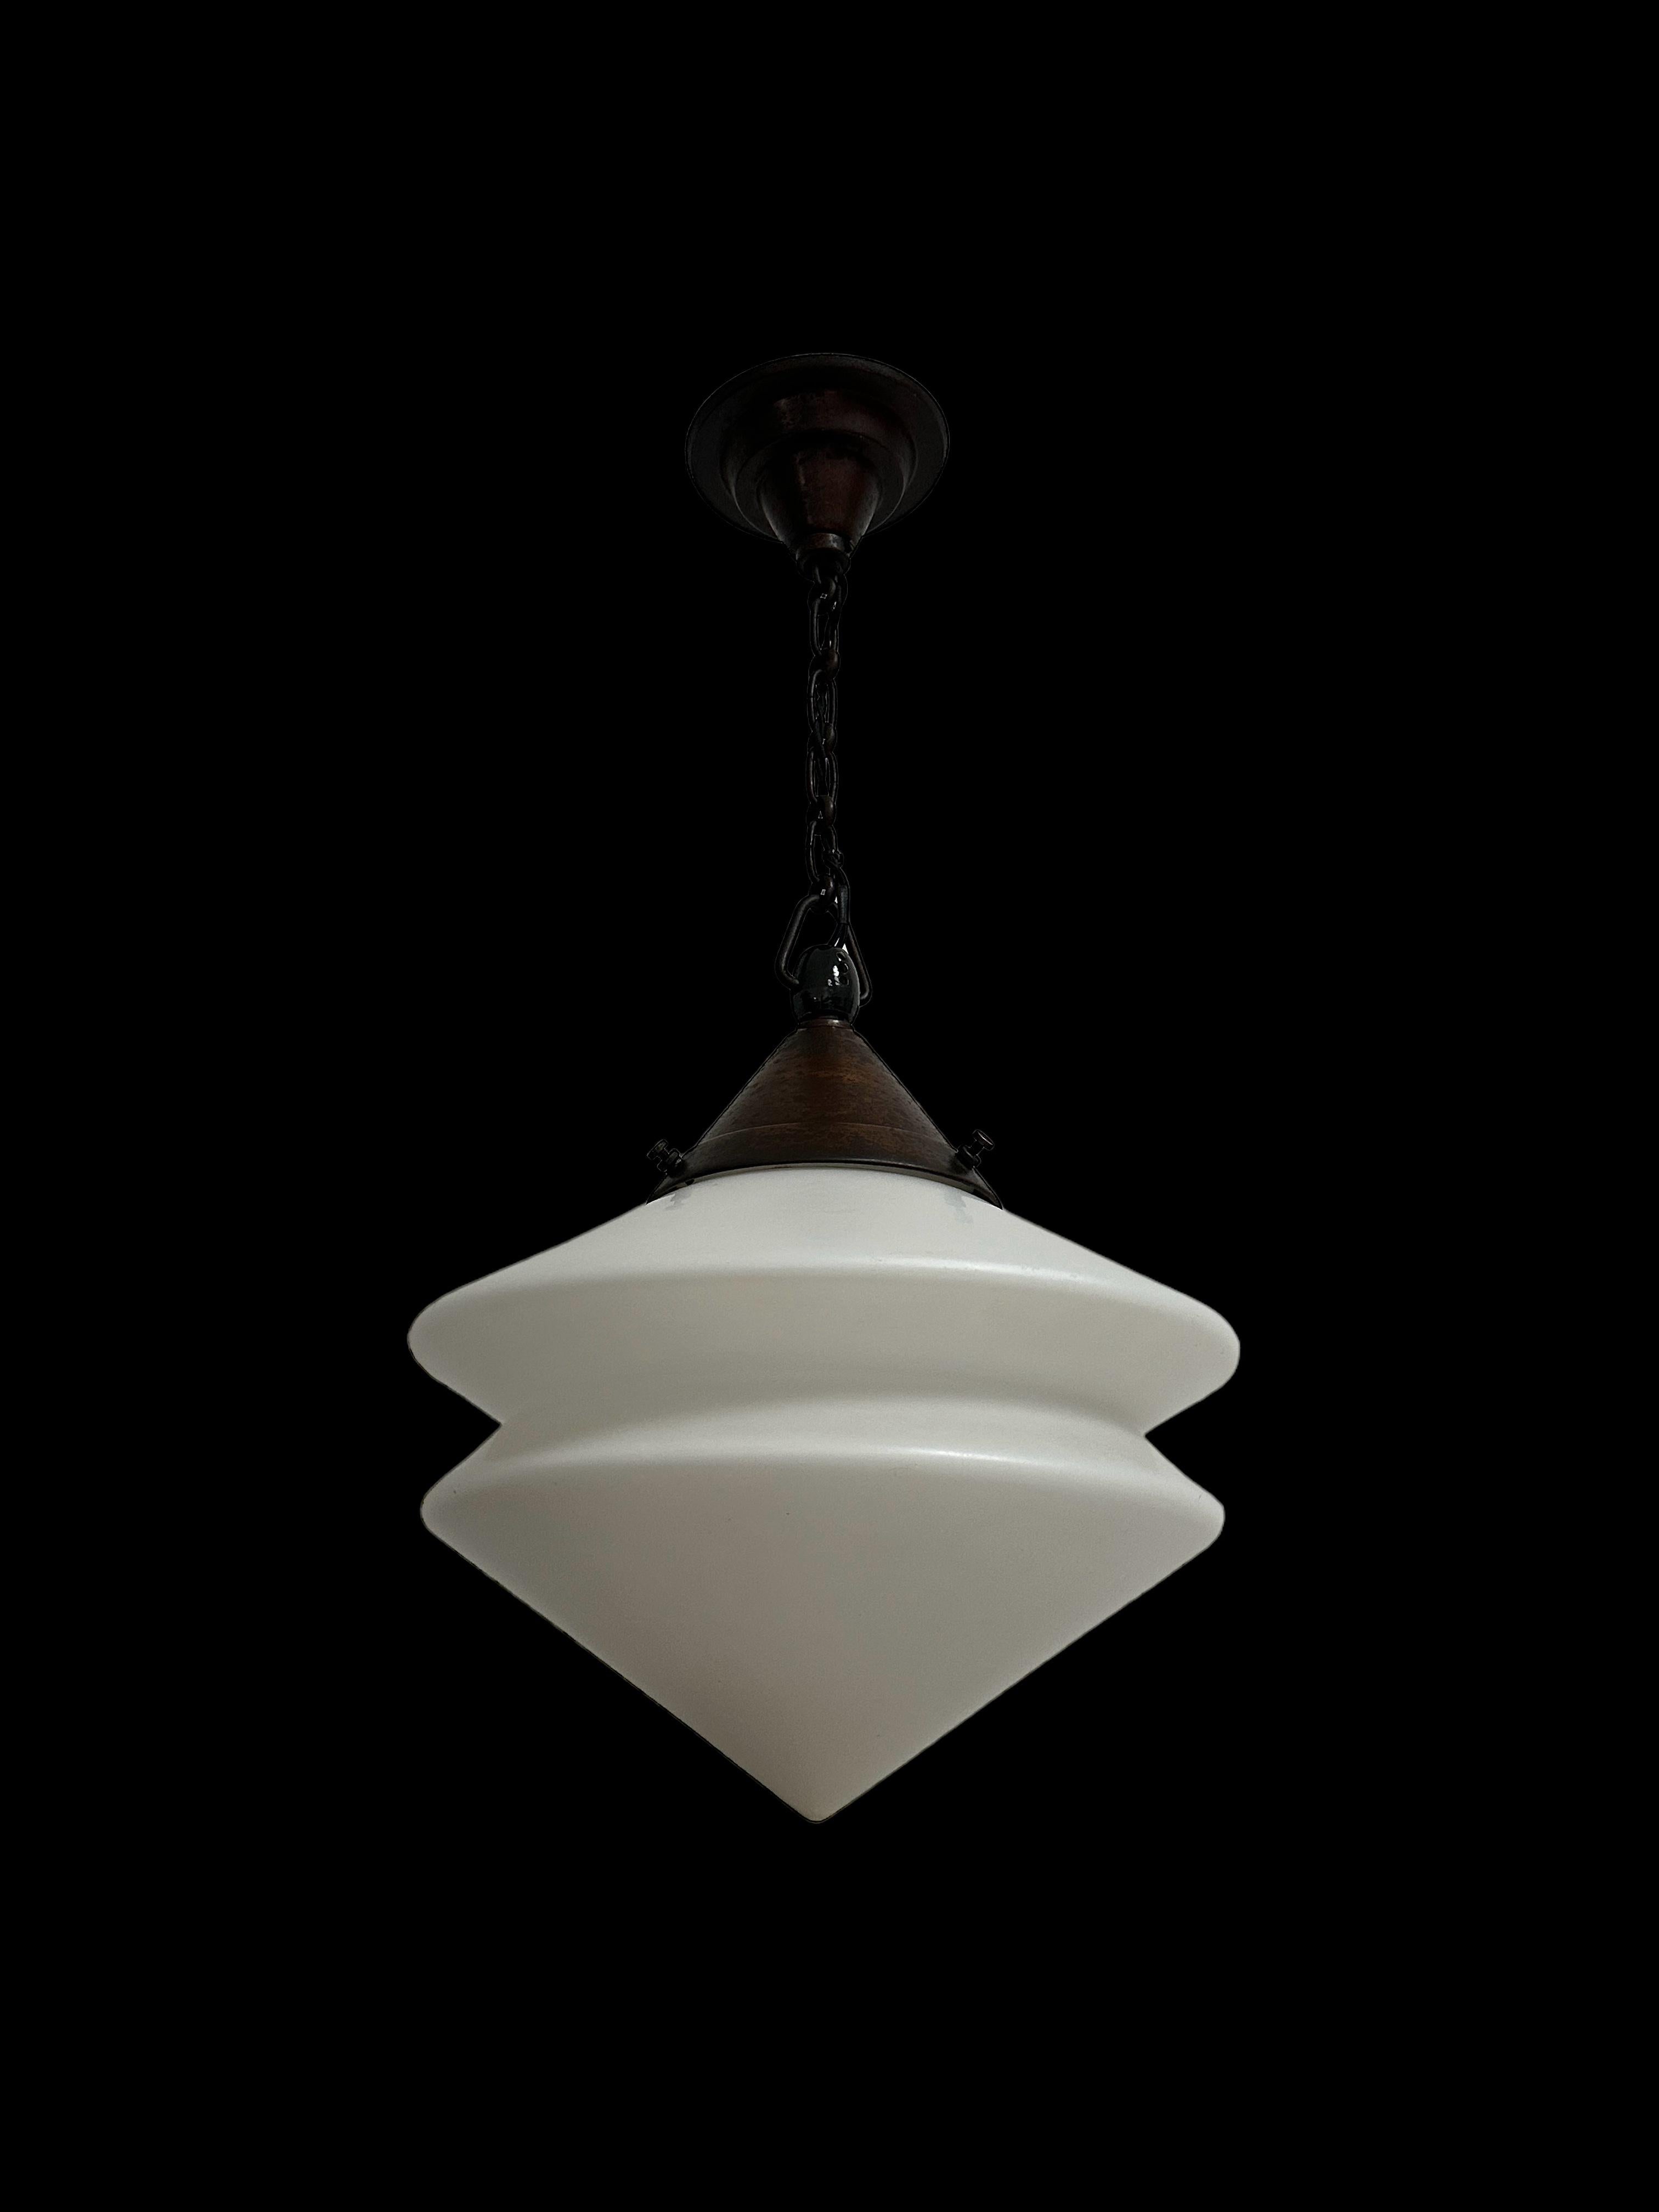 - An original and extremely rare satin opaline Bauhaus ceiling pendant by Kandem, Germany circa 1920.
- A remarkable triangular design to the glass in an incredible condition for its age, the gallery manufactured in ornate steel and porcelain and